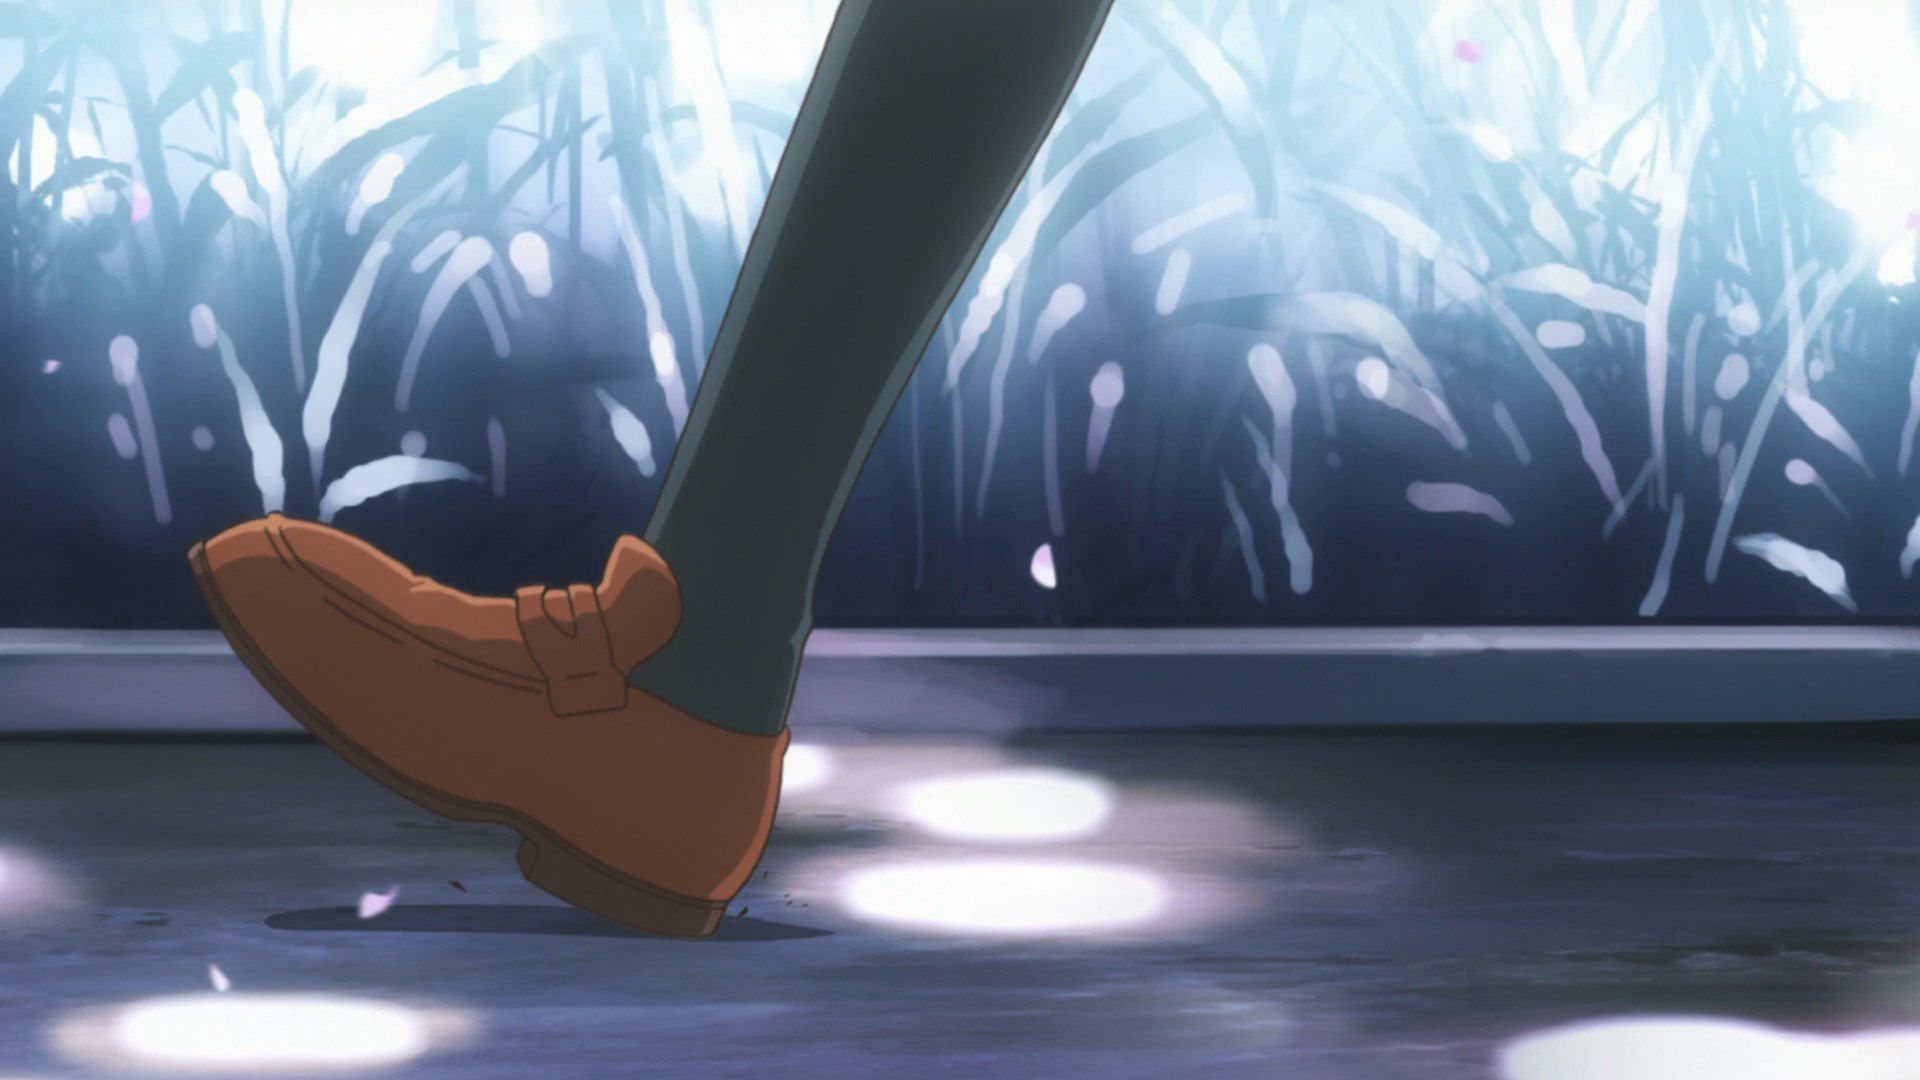 [God images] "love live! ' Μm ' PV's leg is too erotic everyone wakes up to a leg fetish of wwwww 3